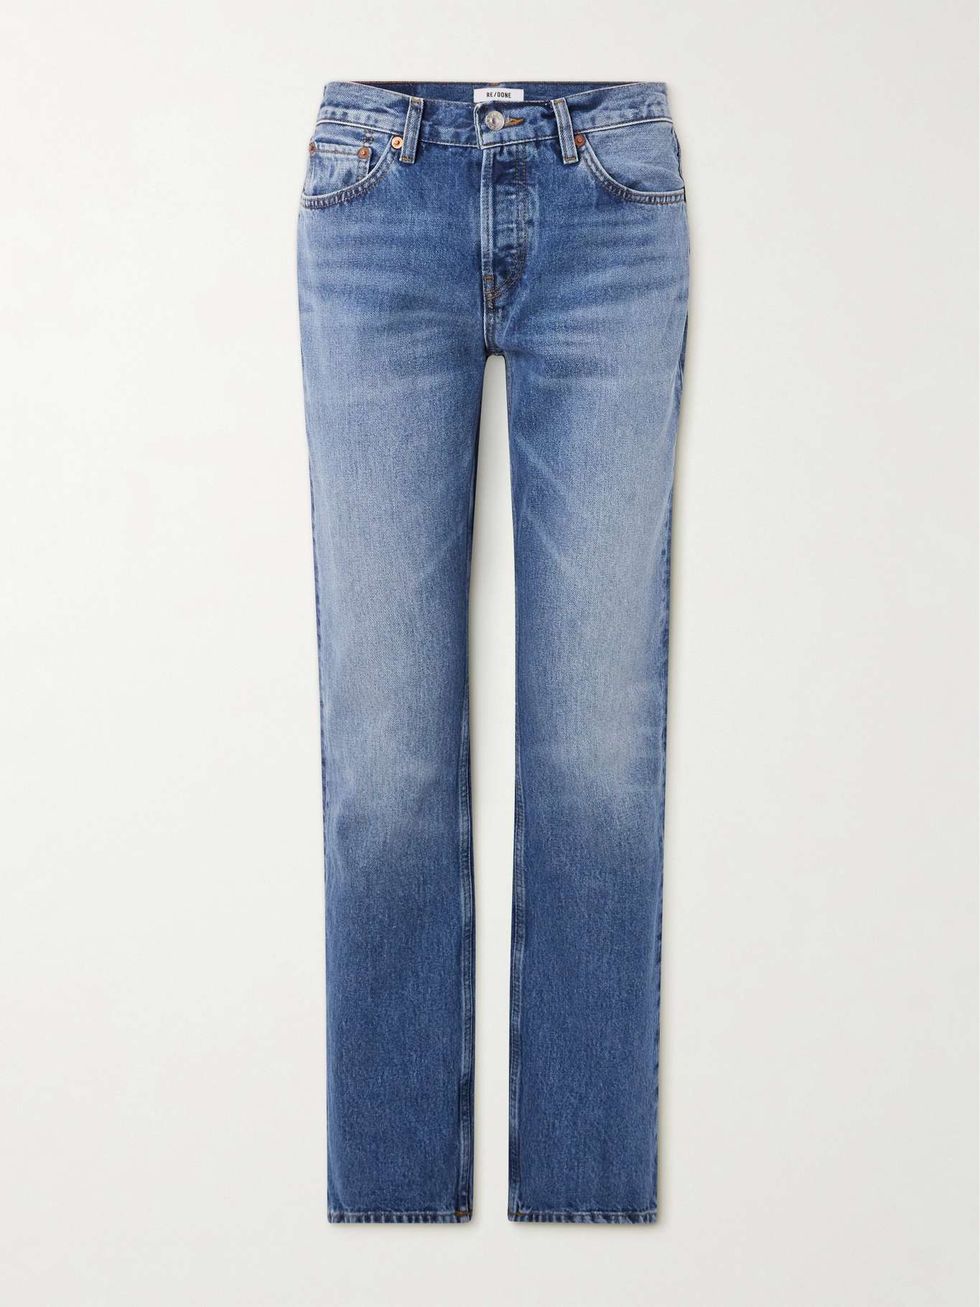 a pair of blue jeans